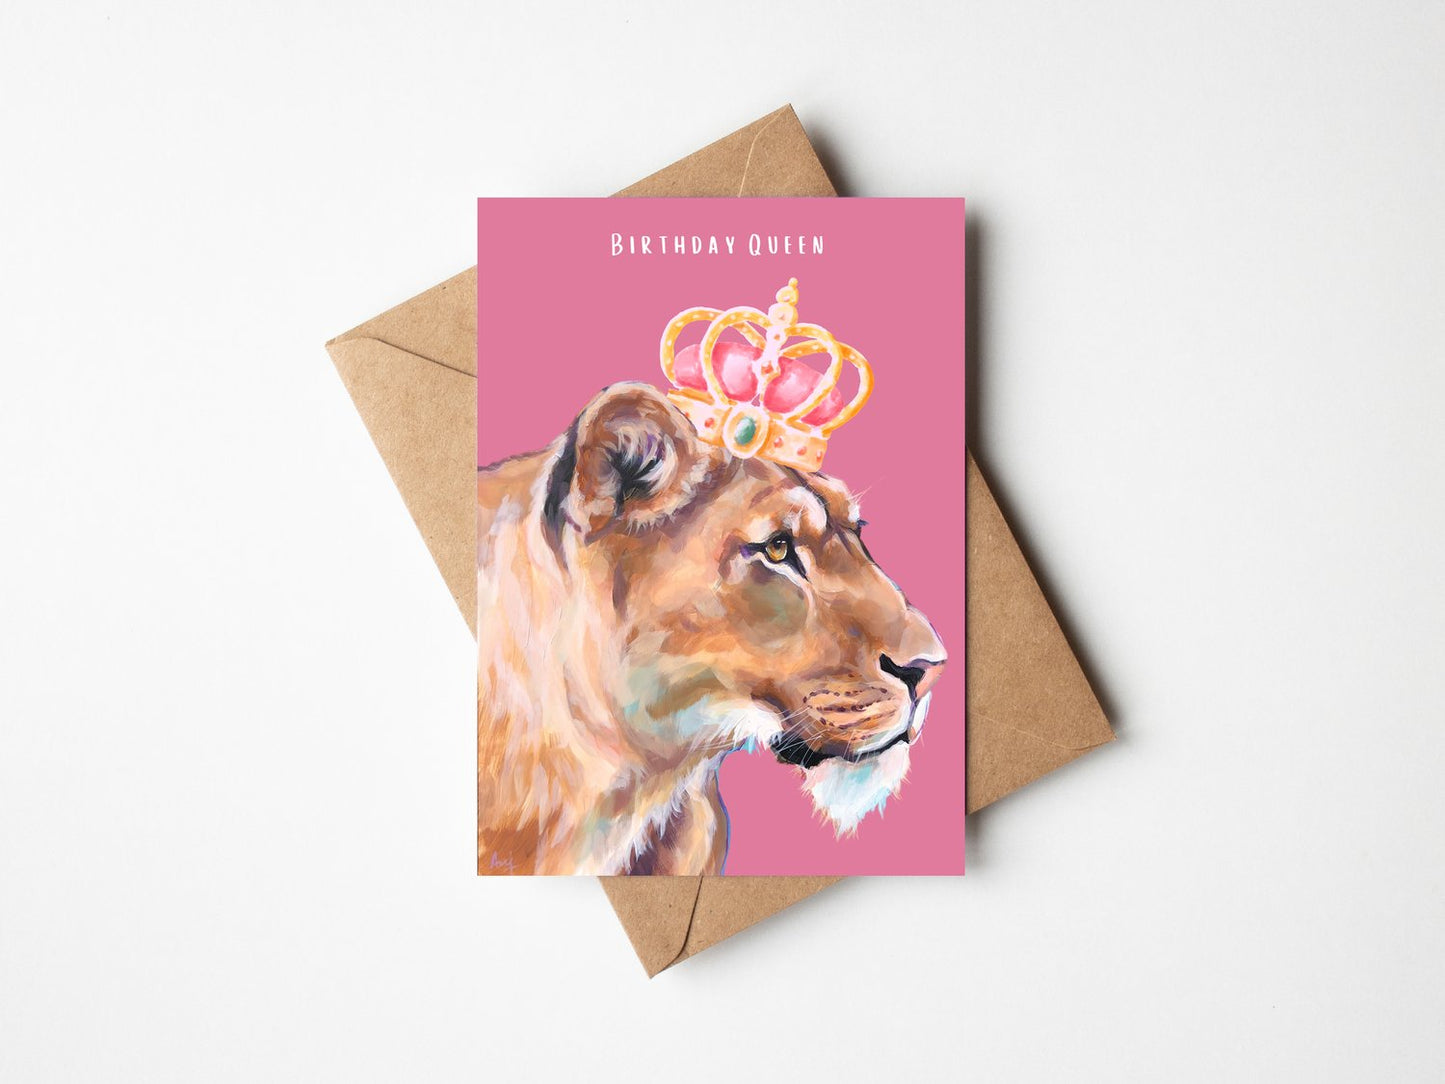 Birthday Queen Lioness - Greetings Card